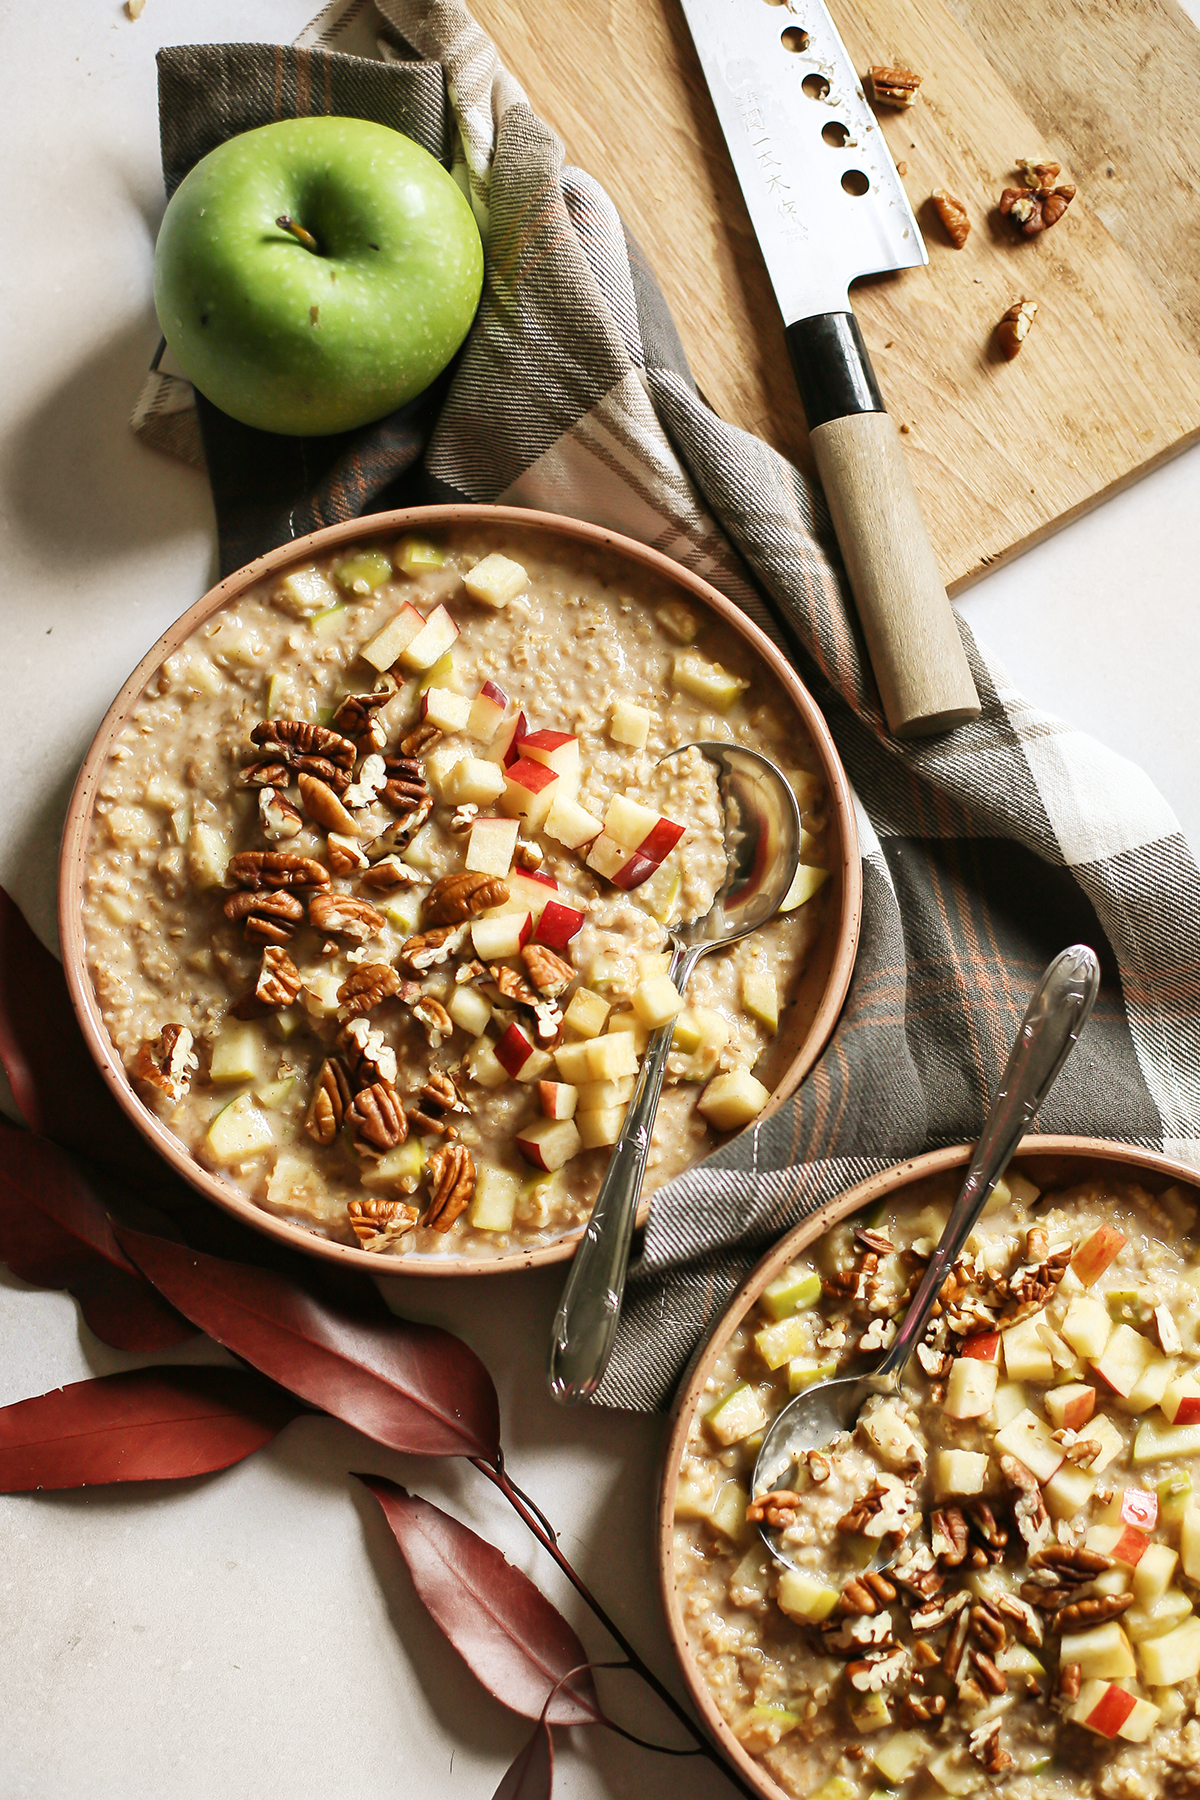 These Overnight Oat Meal Prep Bowls Make Clean Eating Mornings a Breeze!